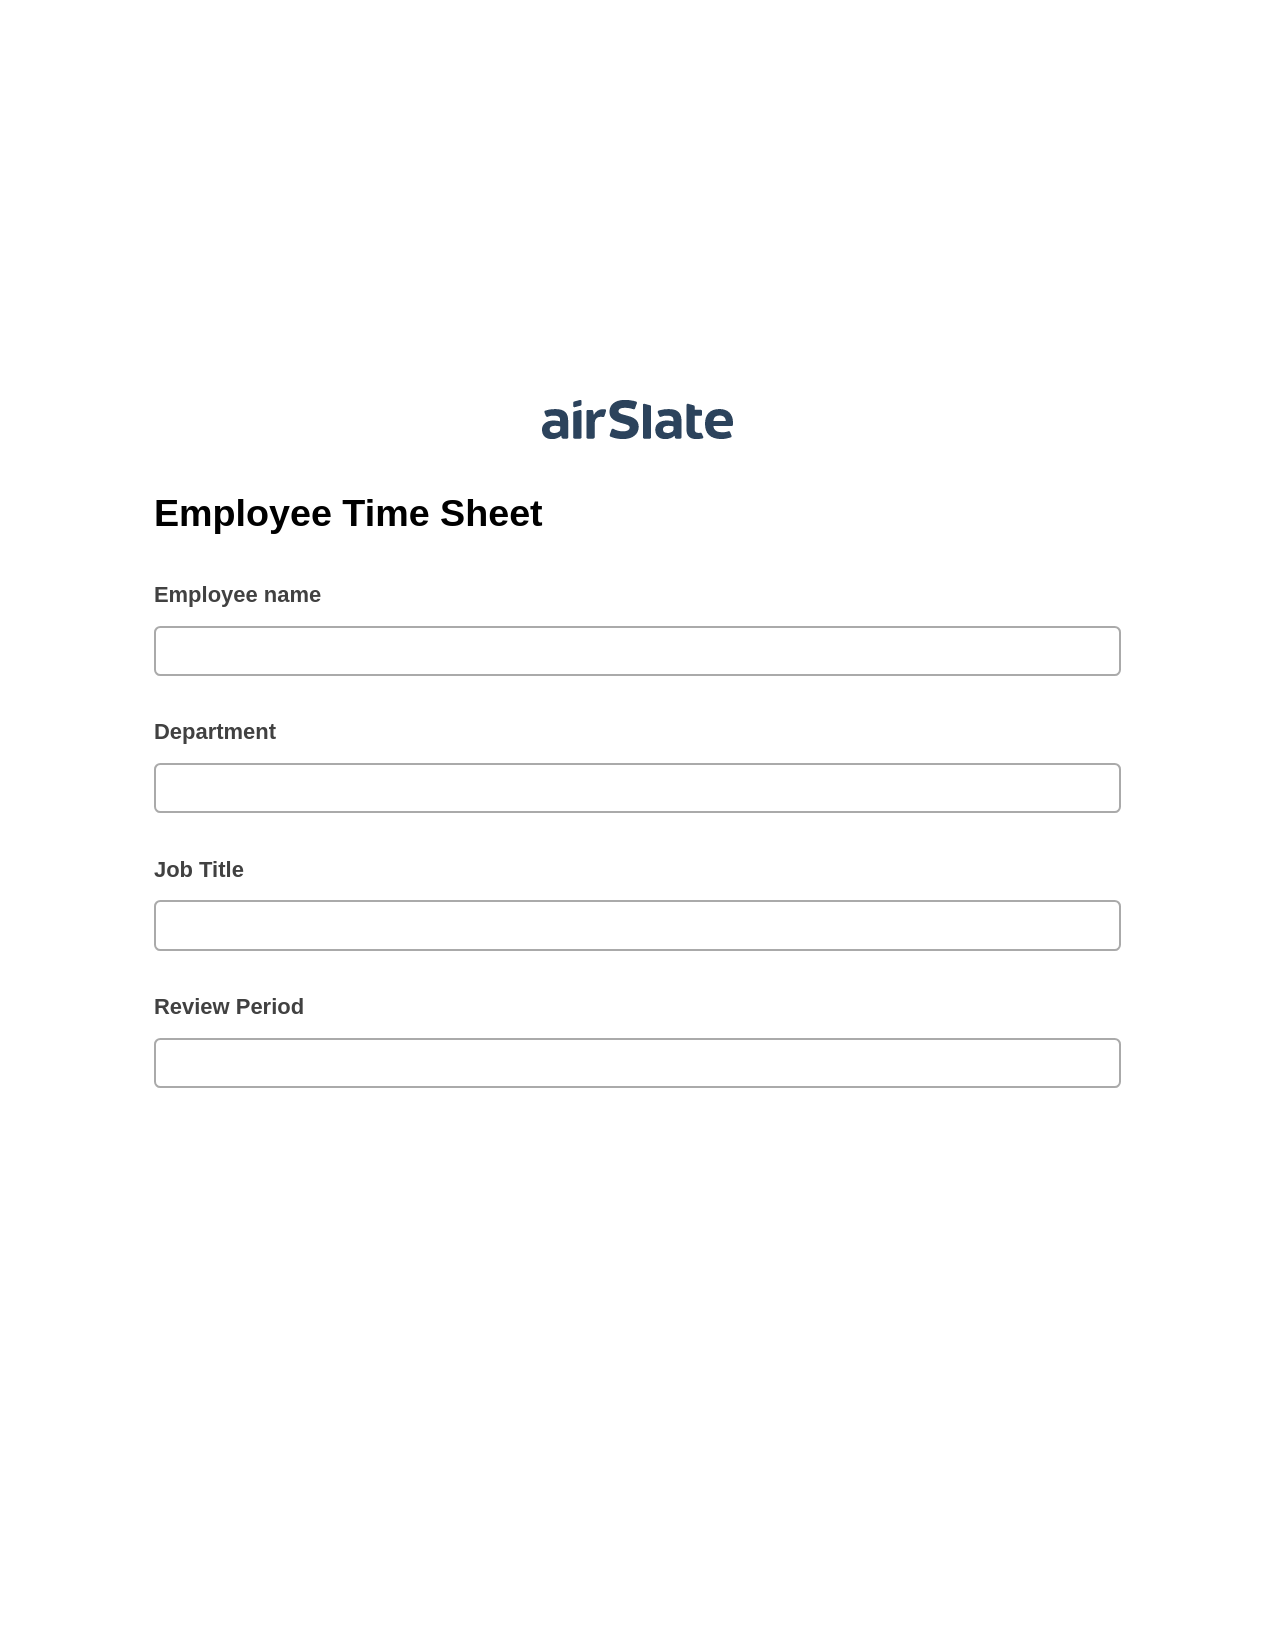 Multirole Employee Time Sheet Pre-fill Dropdowns from MySQL Bot, Hide Signatures Bot, Export to Smartsheet